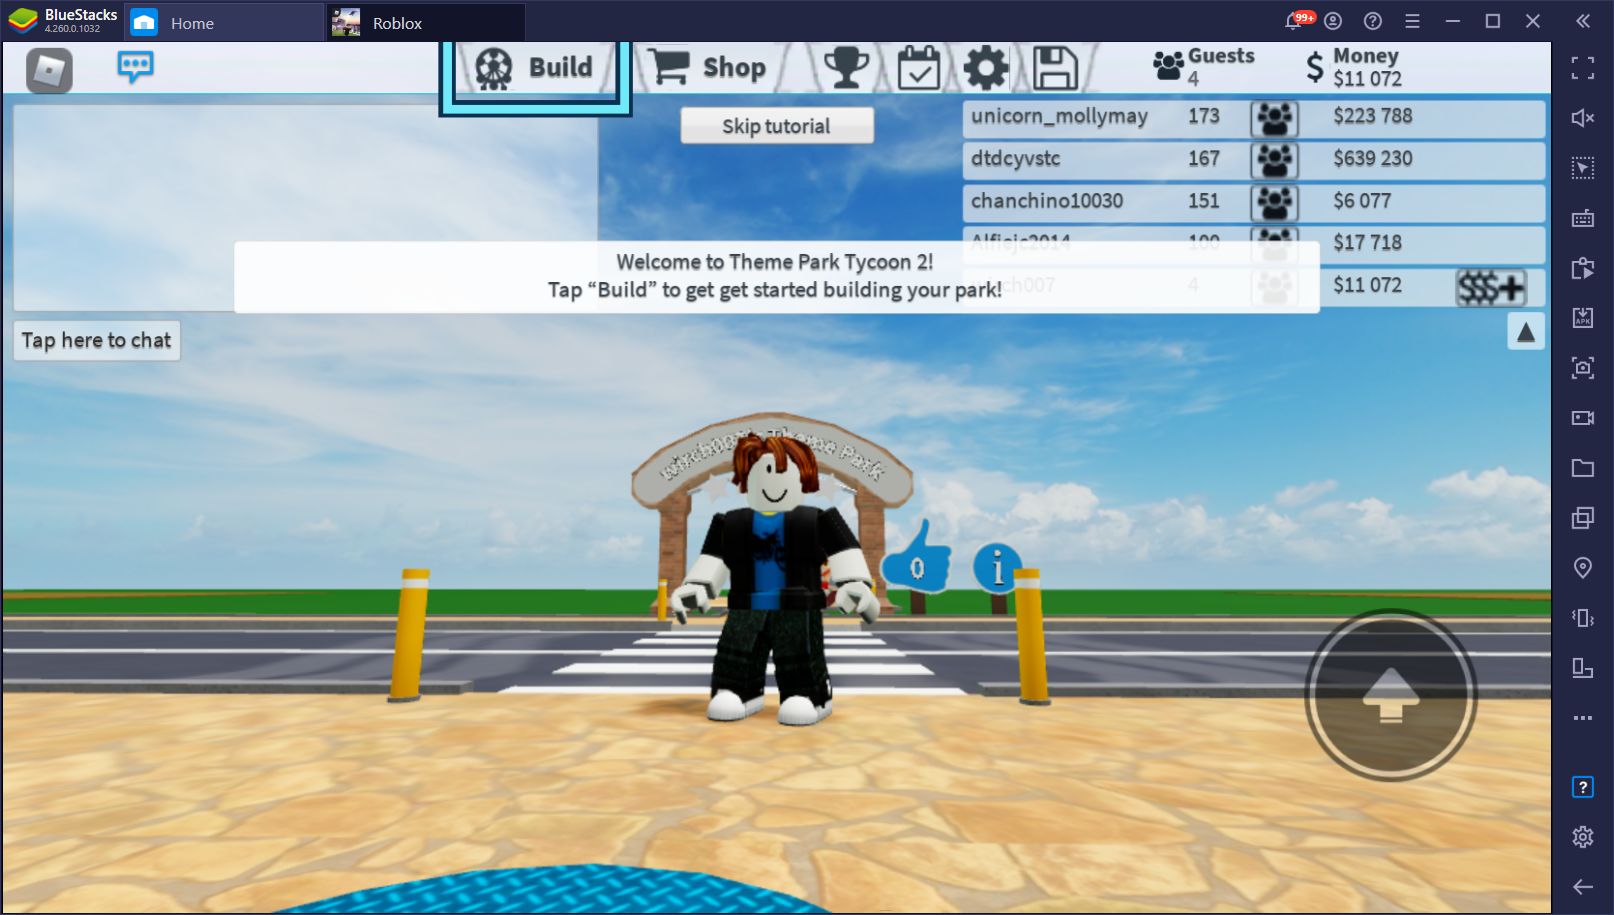 The Best Roblox Games To Play In 2021 Bluestacks - roblox arcade tycoon beta